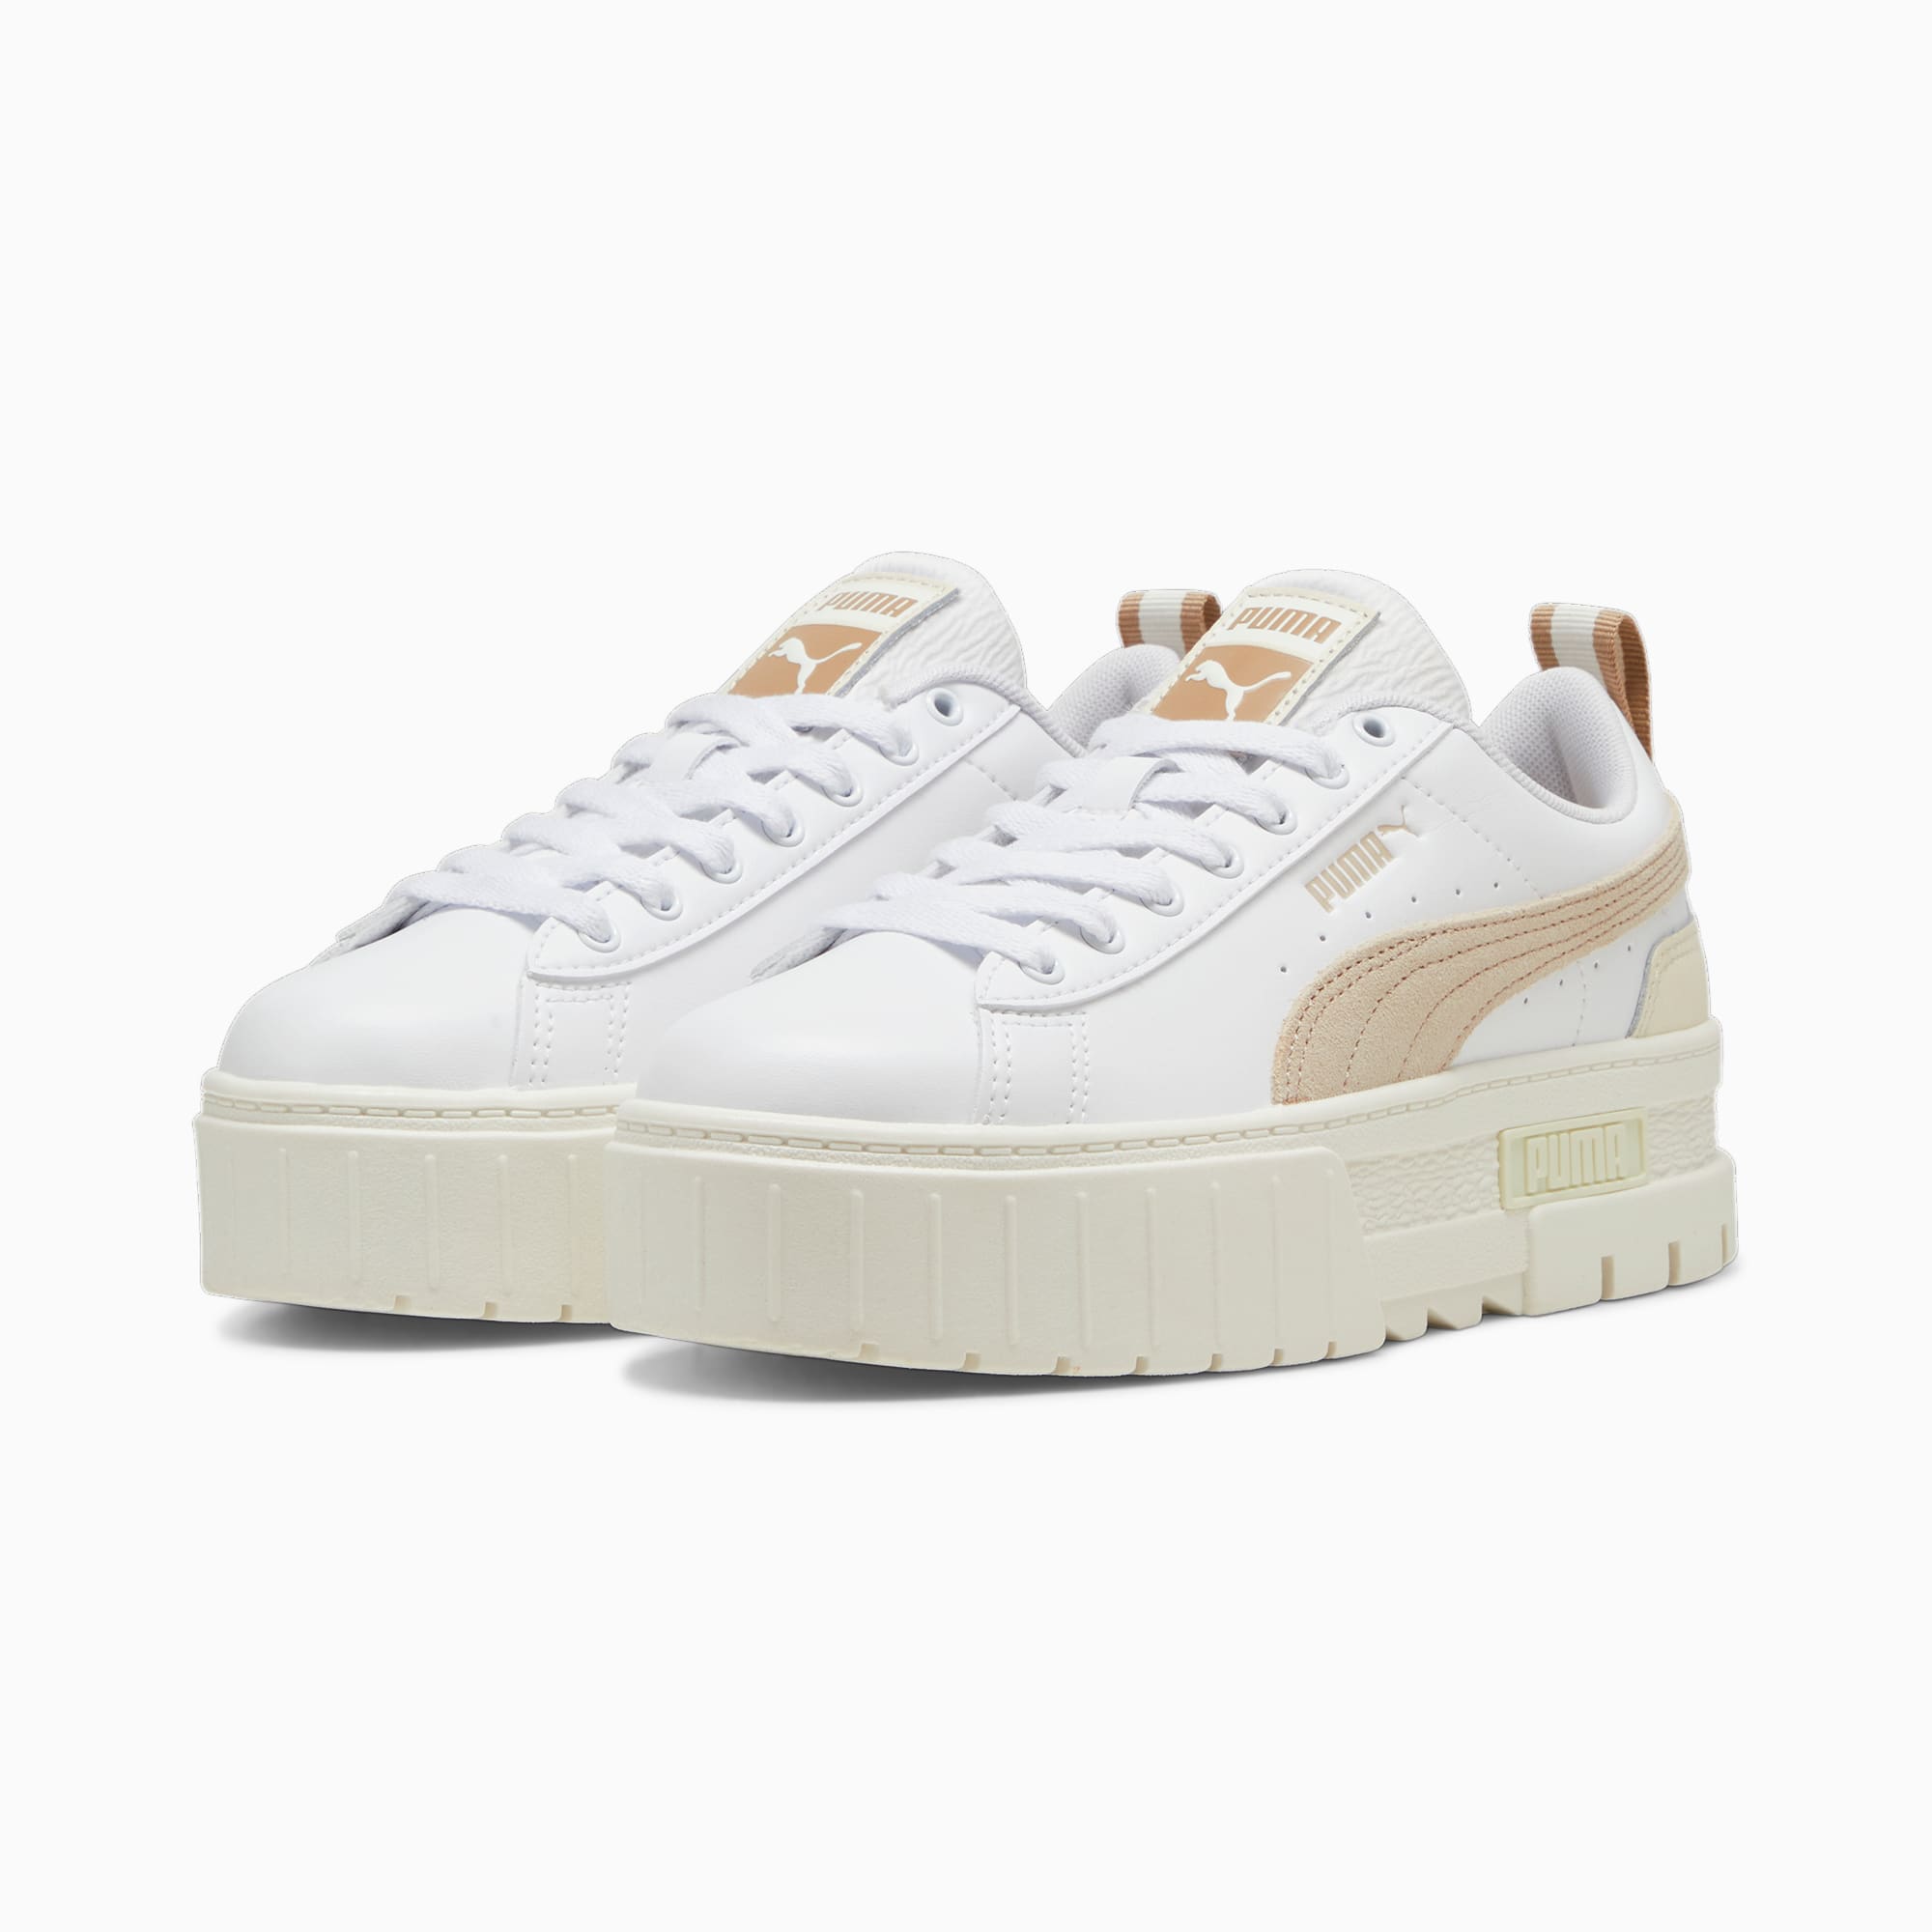 PUMA Mayze Ow Sneakers Women, White/Putty/Warm White, Size 35,5, Shoes